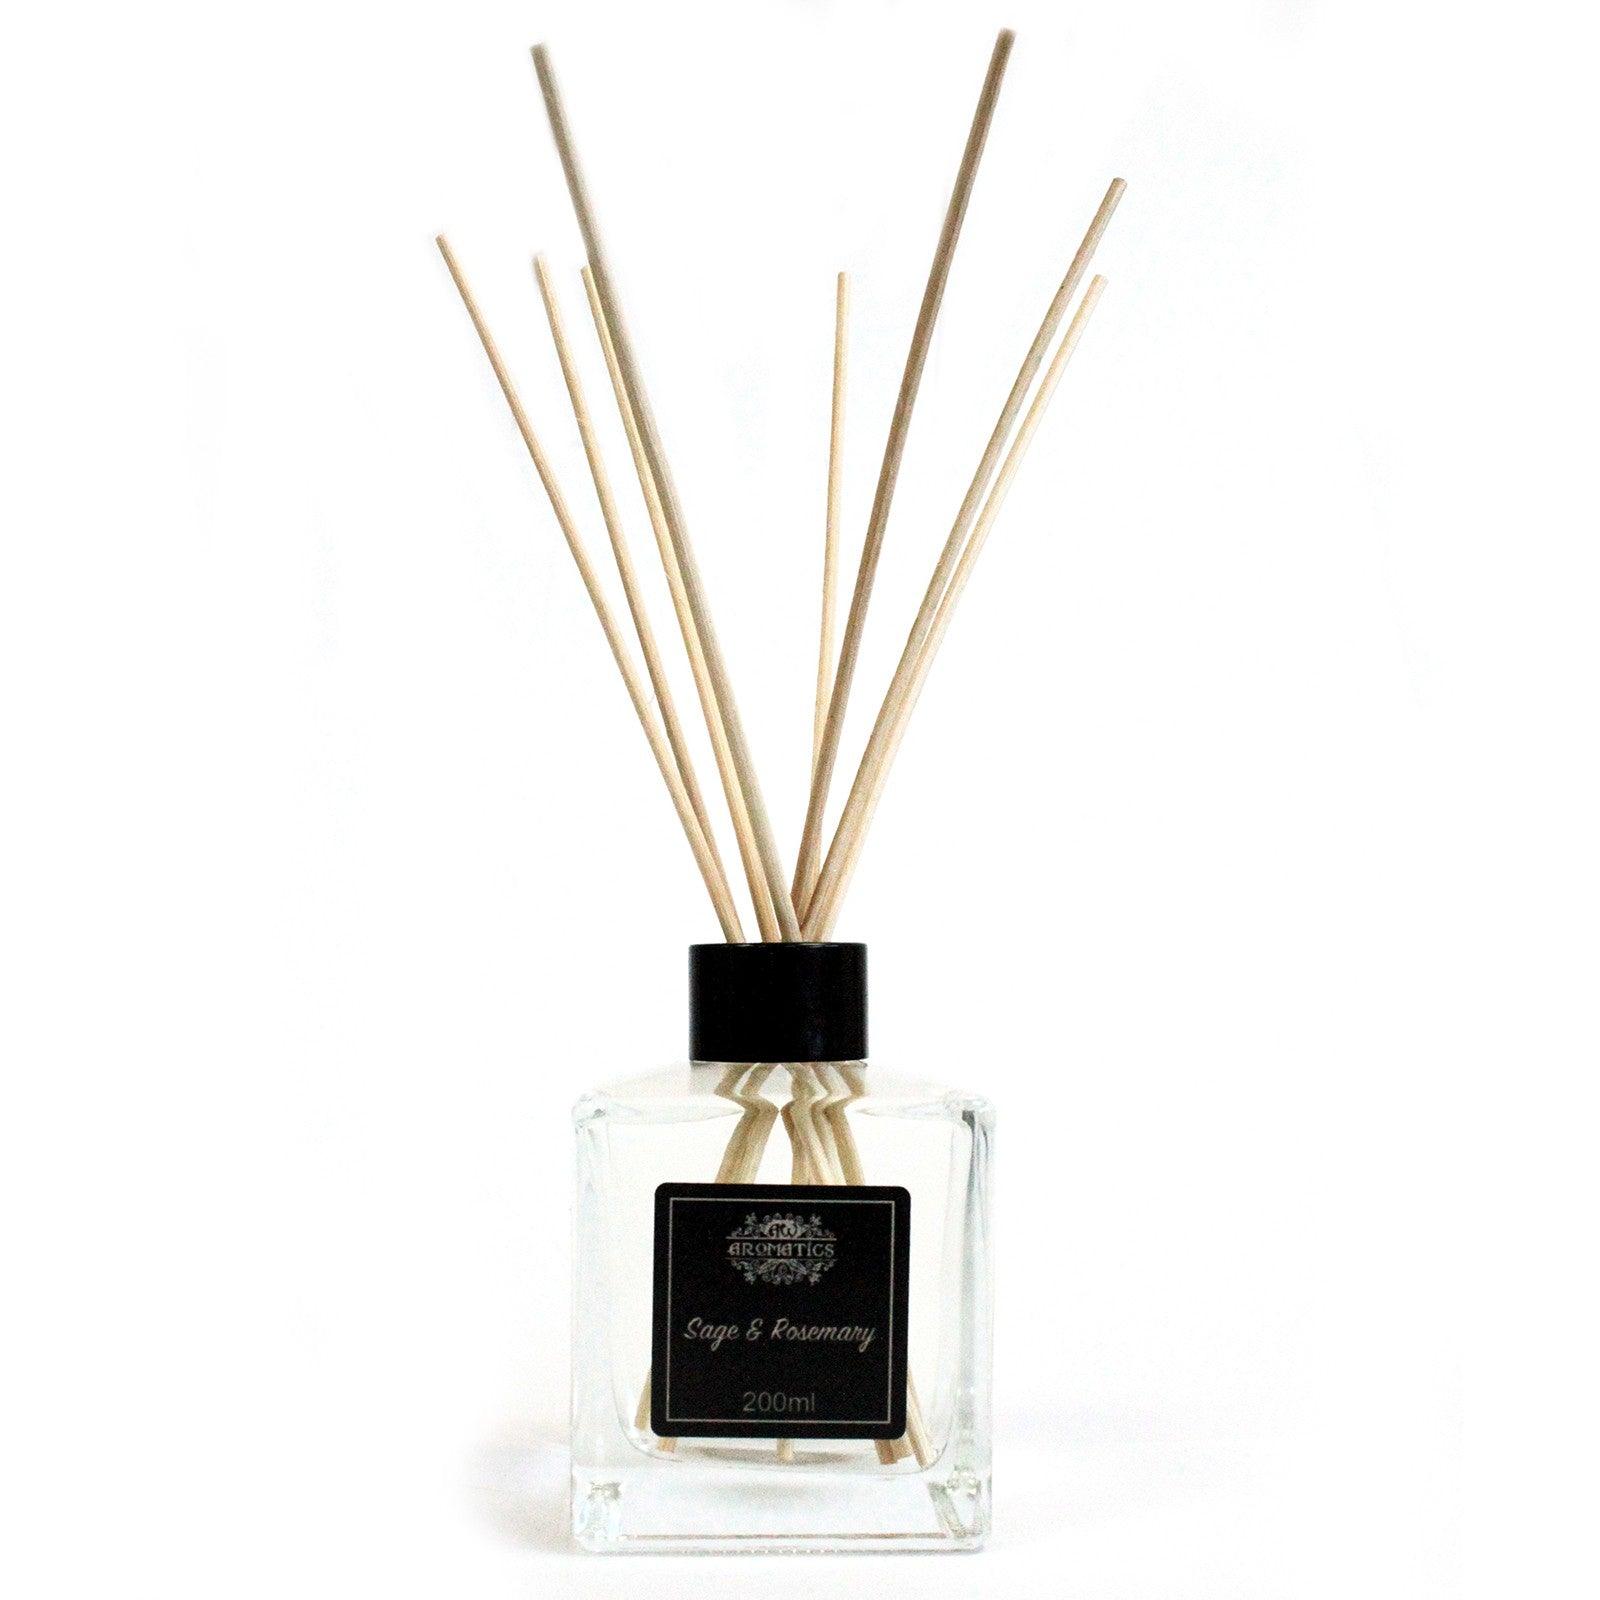 200ml Sage & Rosemary Essential Oil Reed Diffuser - Charming Spaces